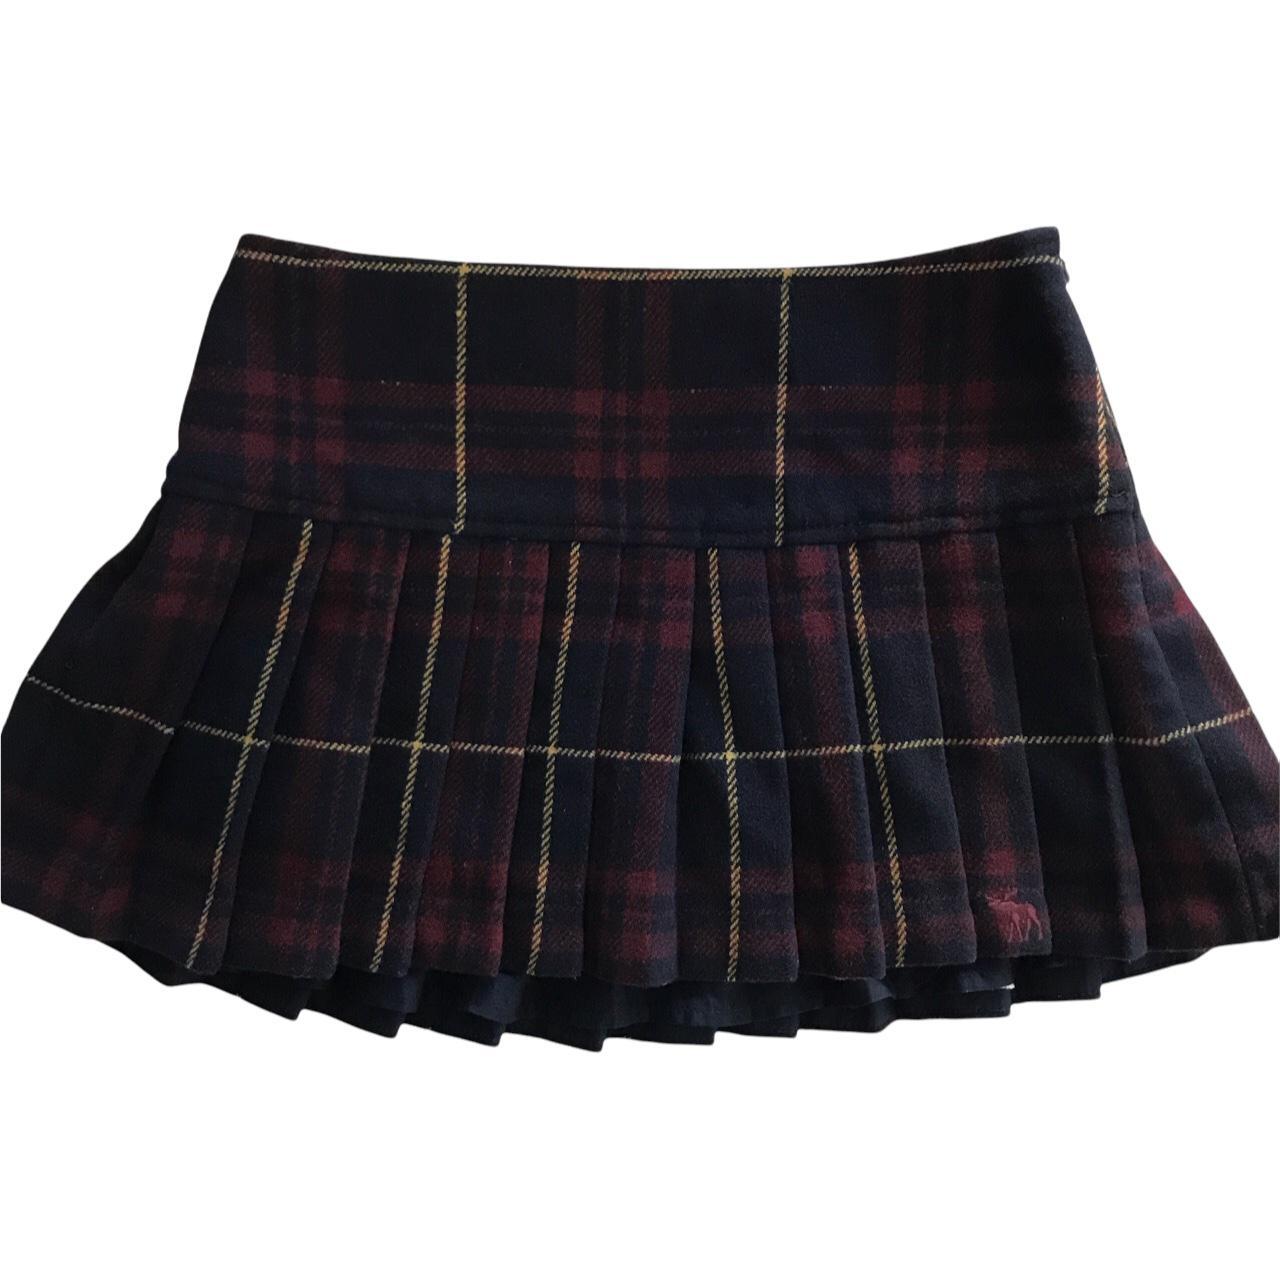 Product Image 2 - Abercrombie and Fitch plaid mini